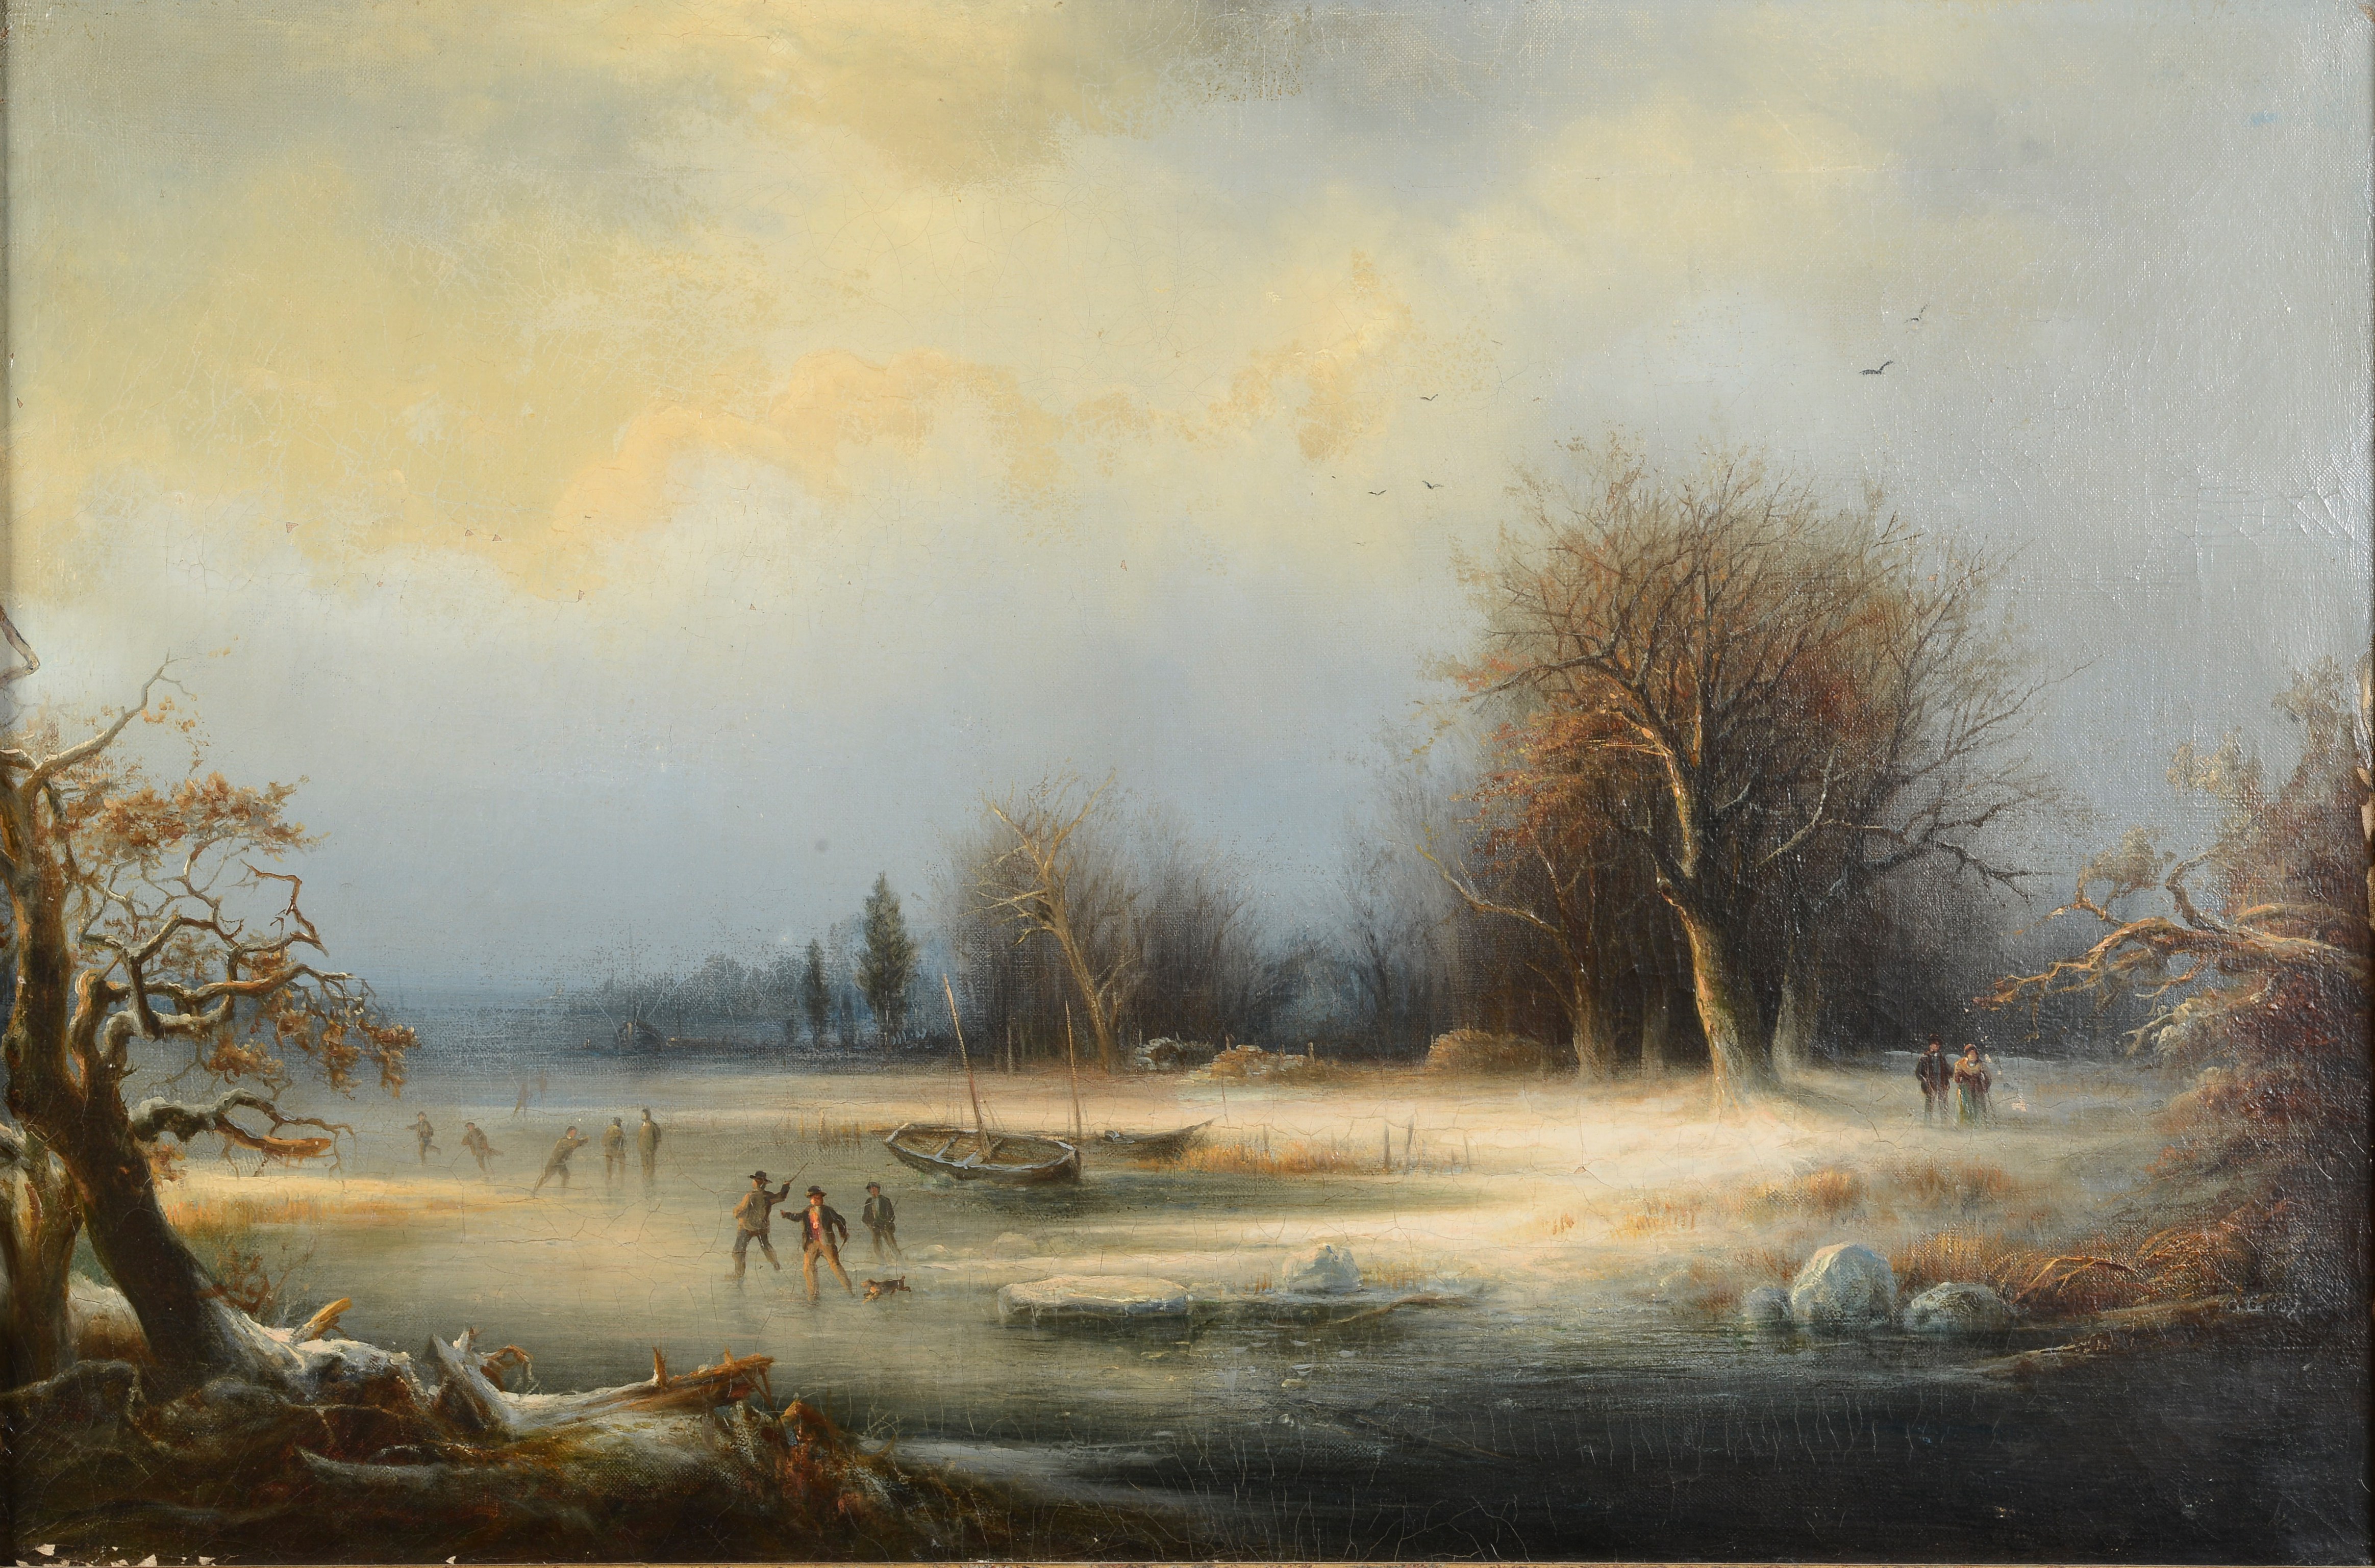 G* LEROY (19th century), Winter landscape with figures skating on a frozen lake, oil on canvas,